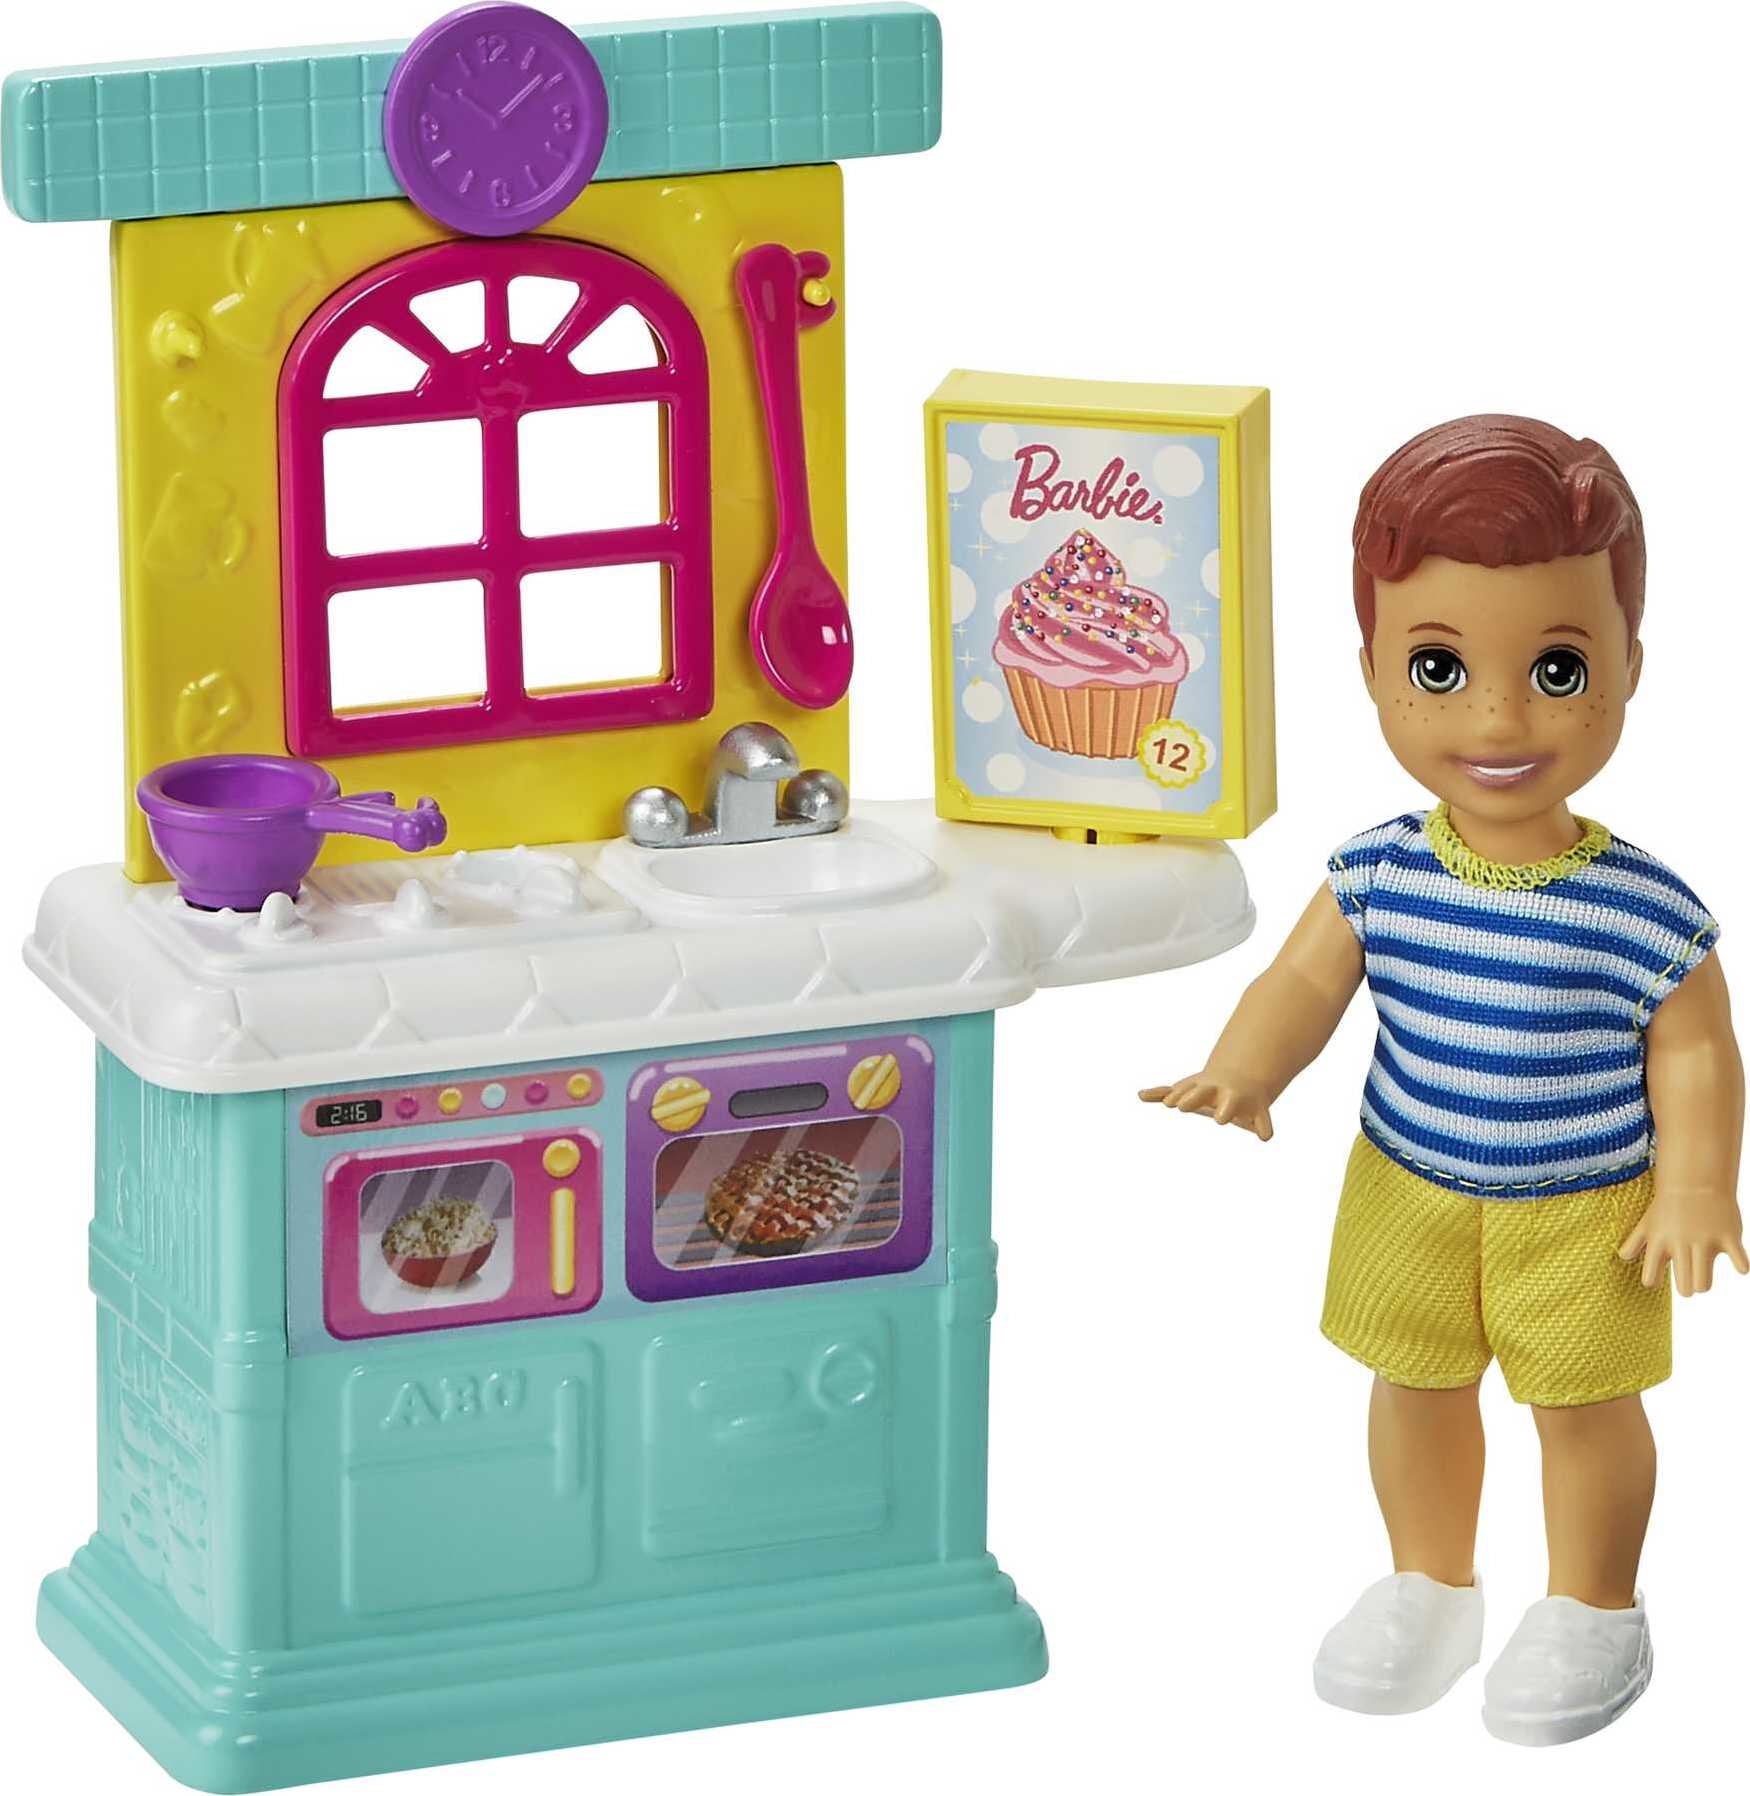 Barbie Skipper Babysitters Inc. Set Small Toddler Doll & Kitchen Playset, Plus Dessert Mix Box, Bowl & Spoon, Gift For 3 To 7 Year Olds - Walmart.com